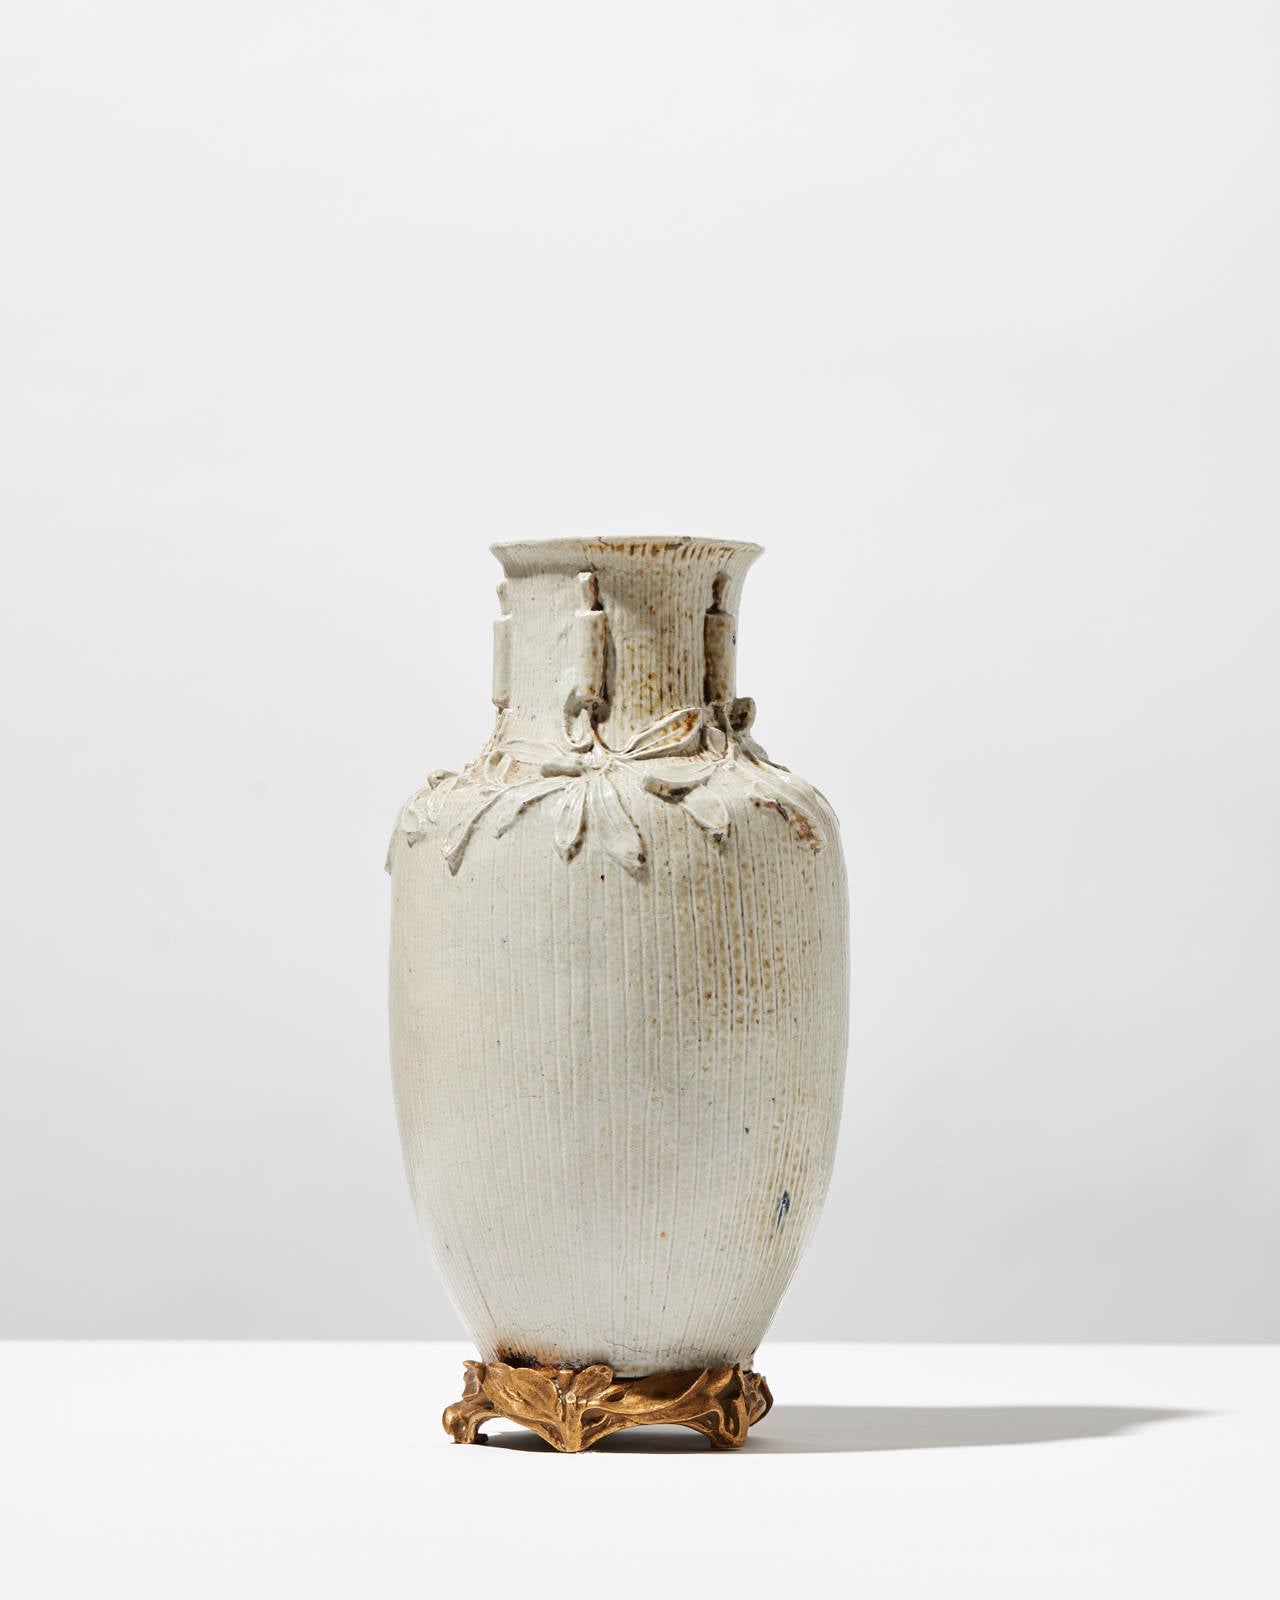 This vase rests upon a bronze mount, which contrasts with the vase's rather matte white finish. The vertical indentations point upwards towards the narrowed neck and flared mouth. Gathered near the neck are a series of plants that are hung upside